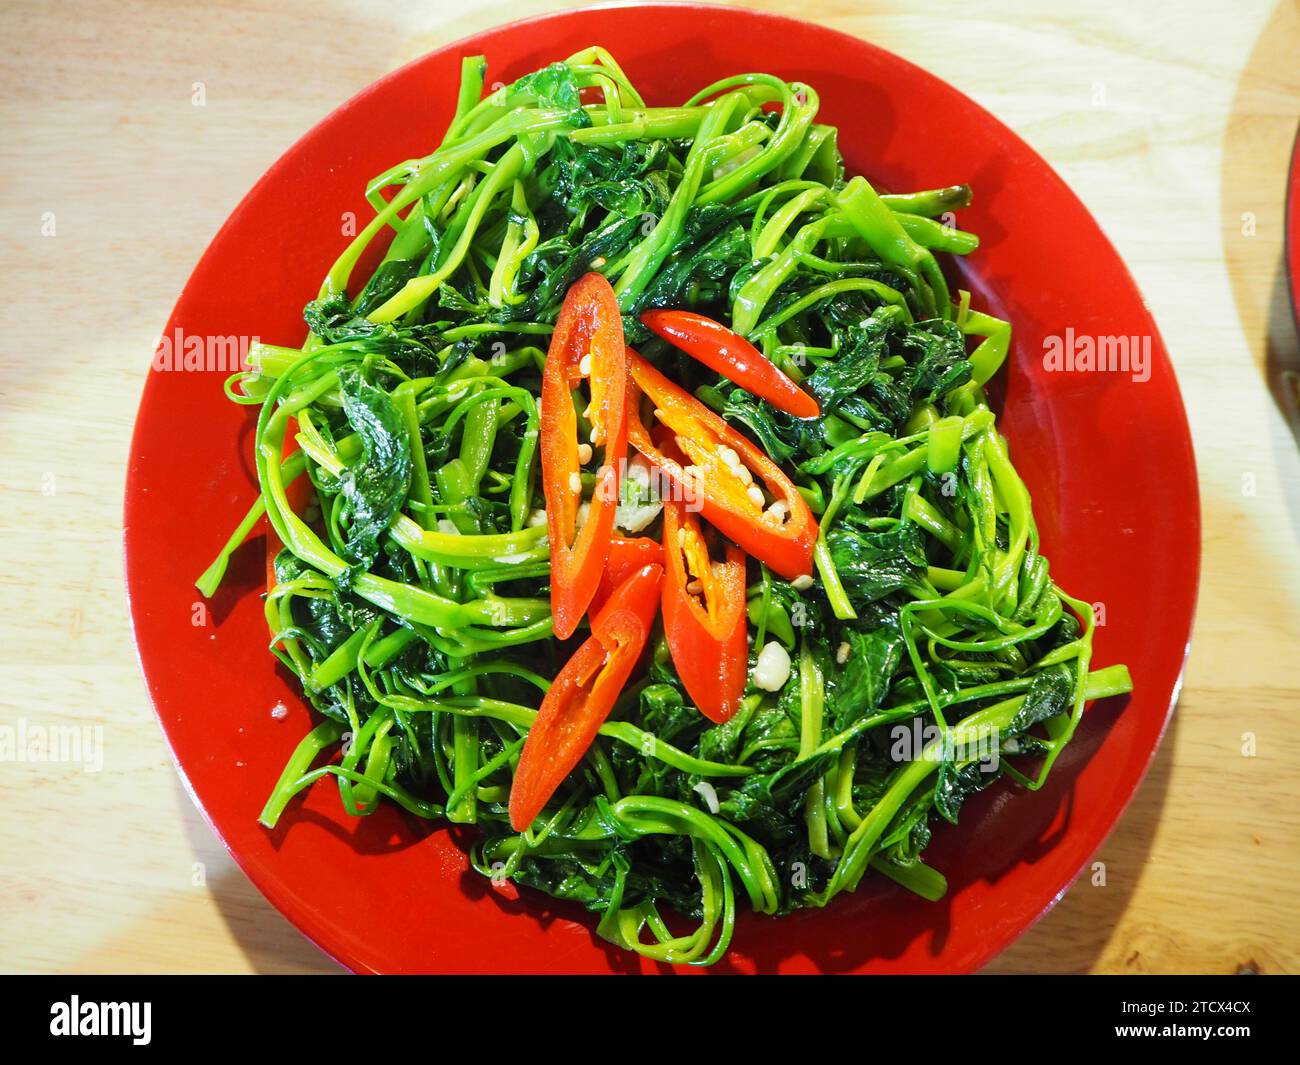 Coocked morning glory dish. Morning glory is also know as water spinach, water convolvulus, ong-choy, kang-kung or swamp cabbage. Stock Photo